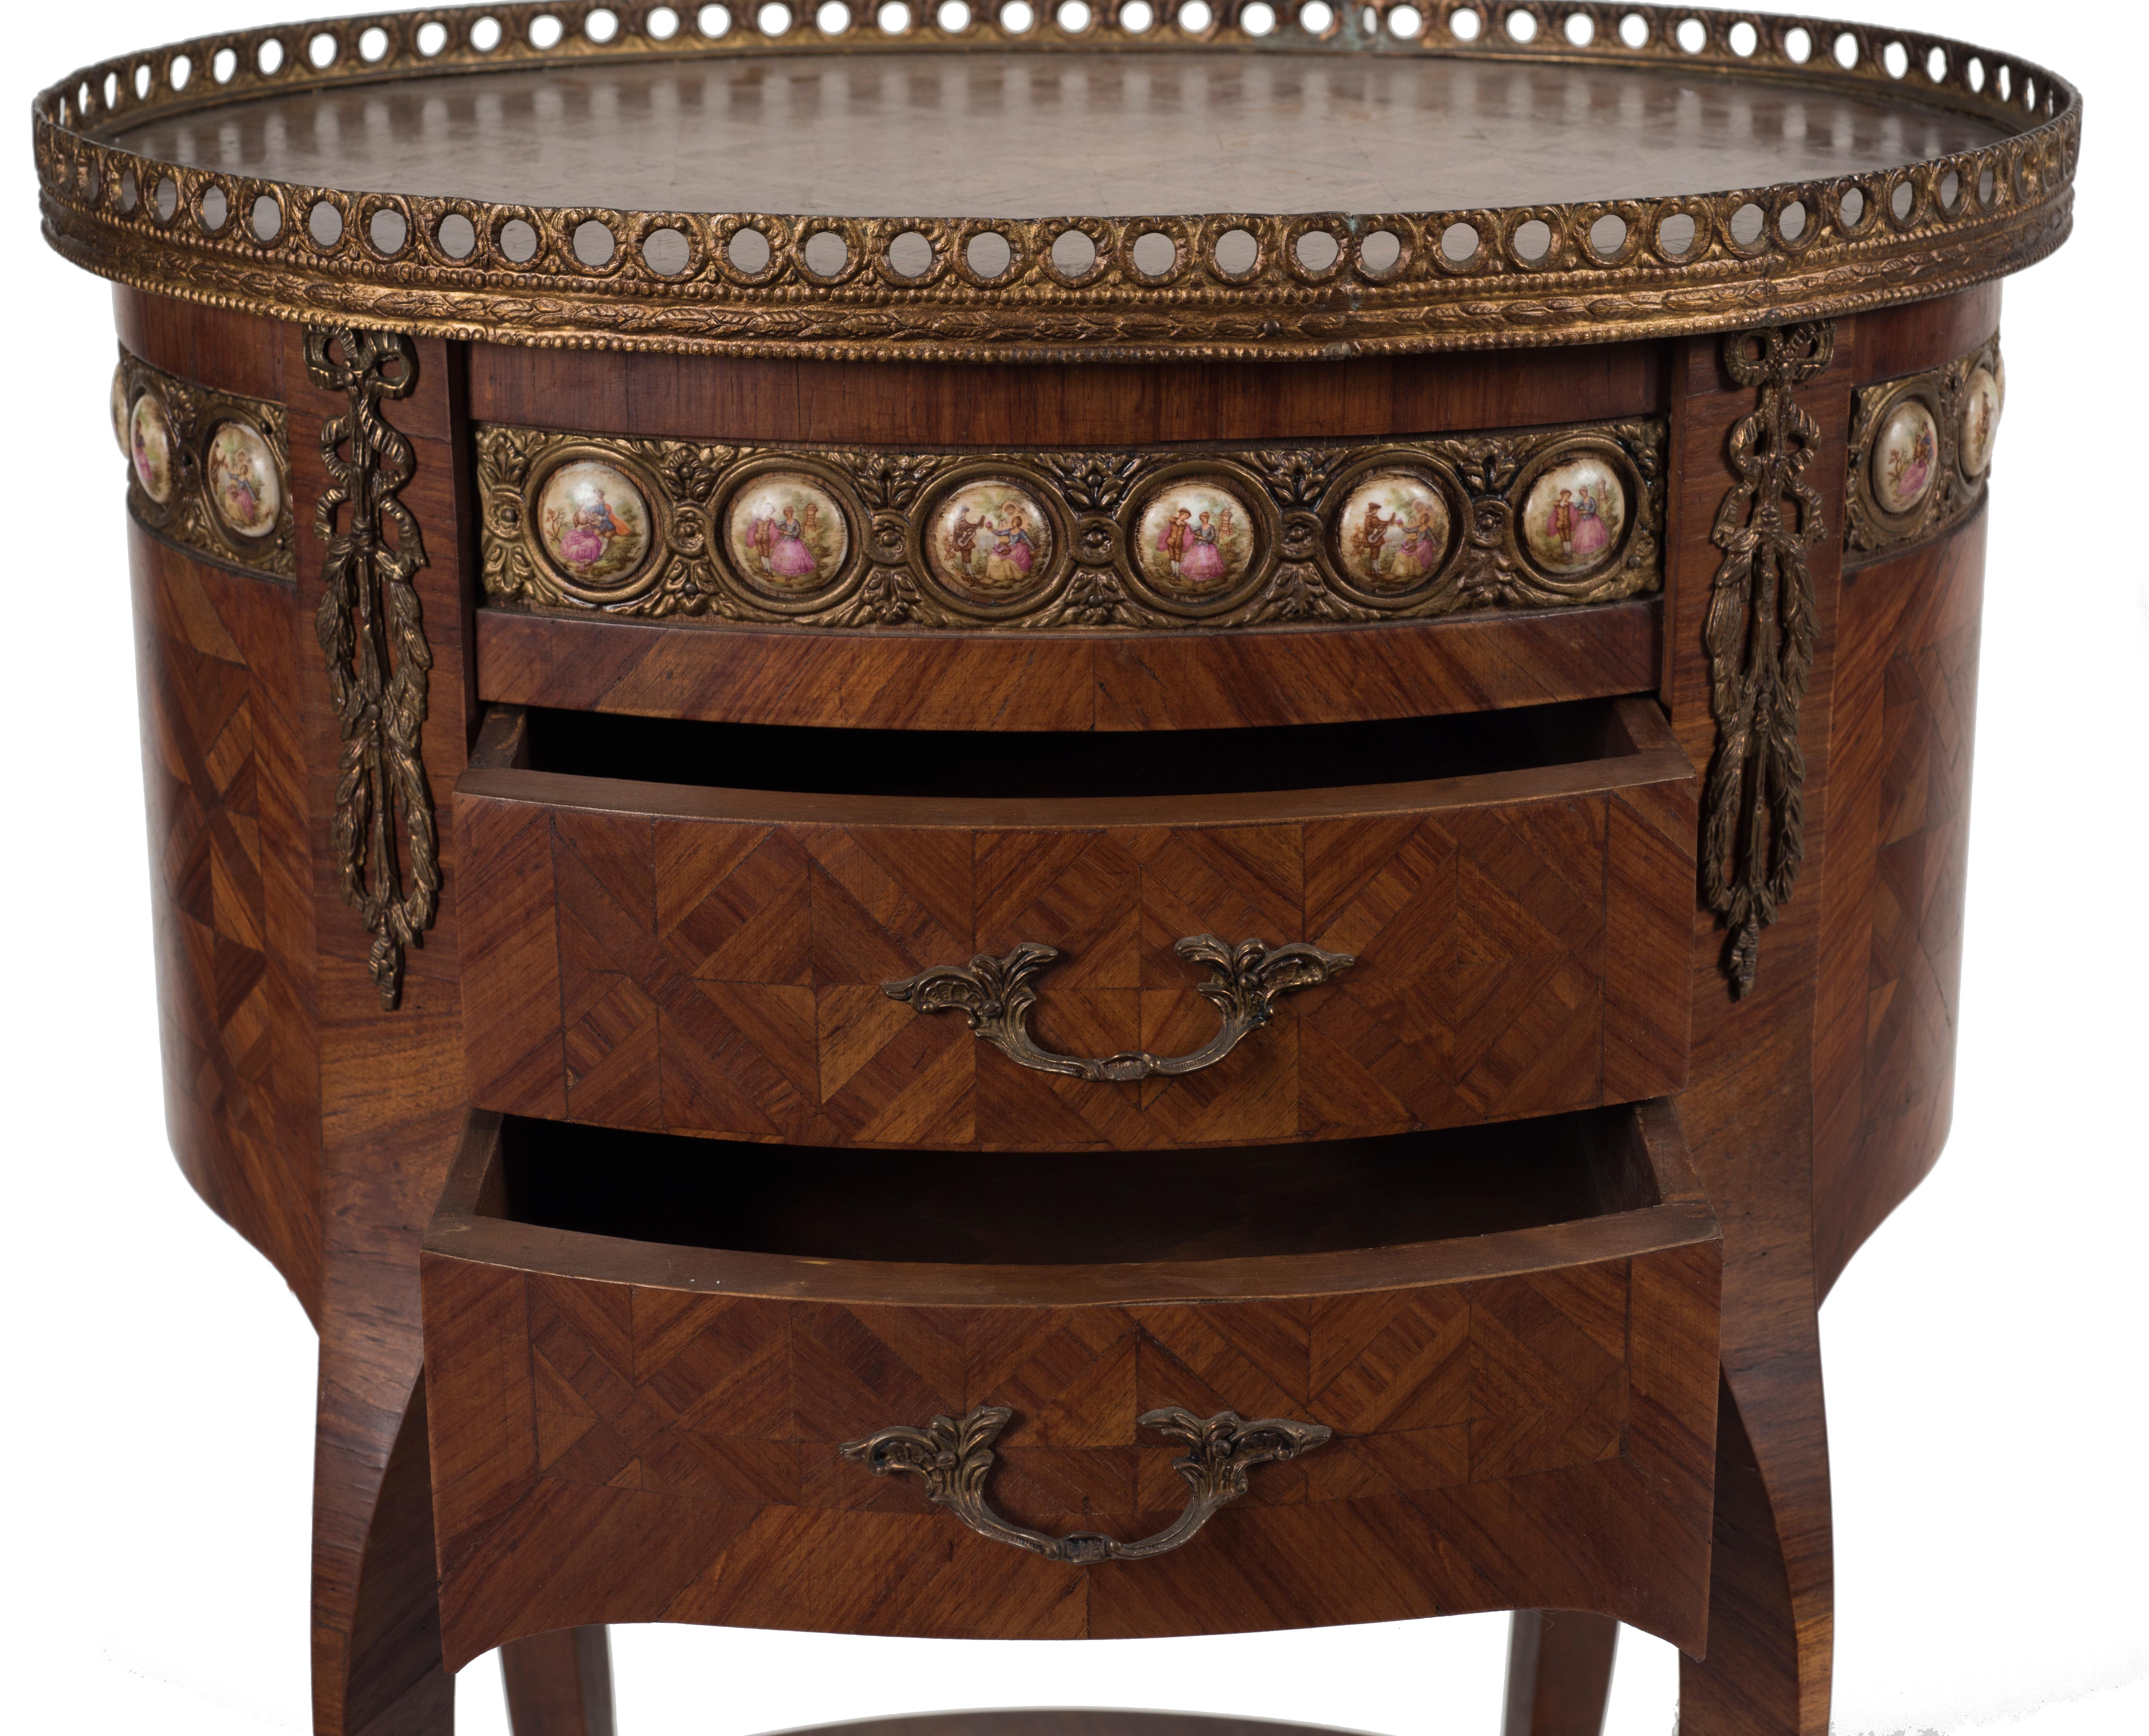 Oval ancient coffee table with 2 drawers on front and bronze decorations. Series of small medallions with genre scenes under the table, surrounded by a bronze banister.
France, end of 19th century.
Good conditions.

This object is shipped from